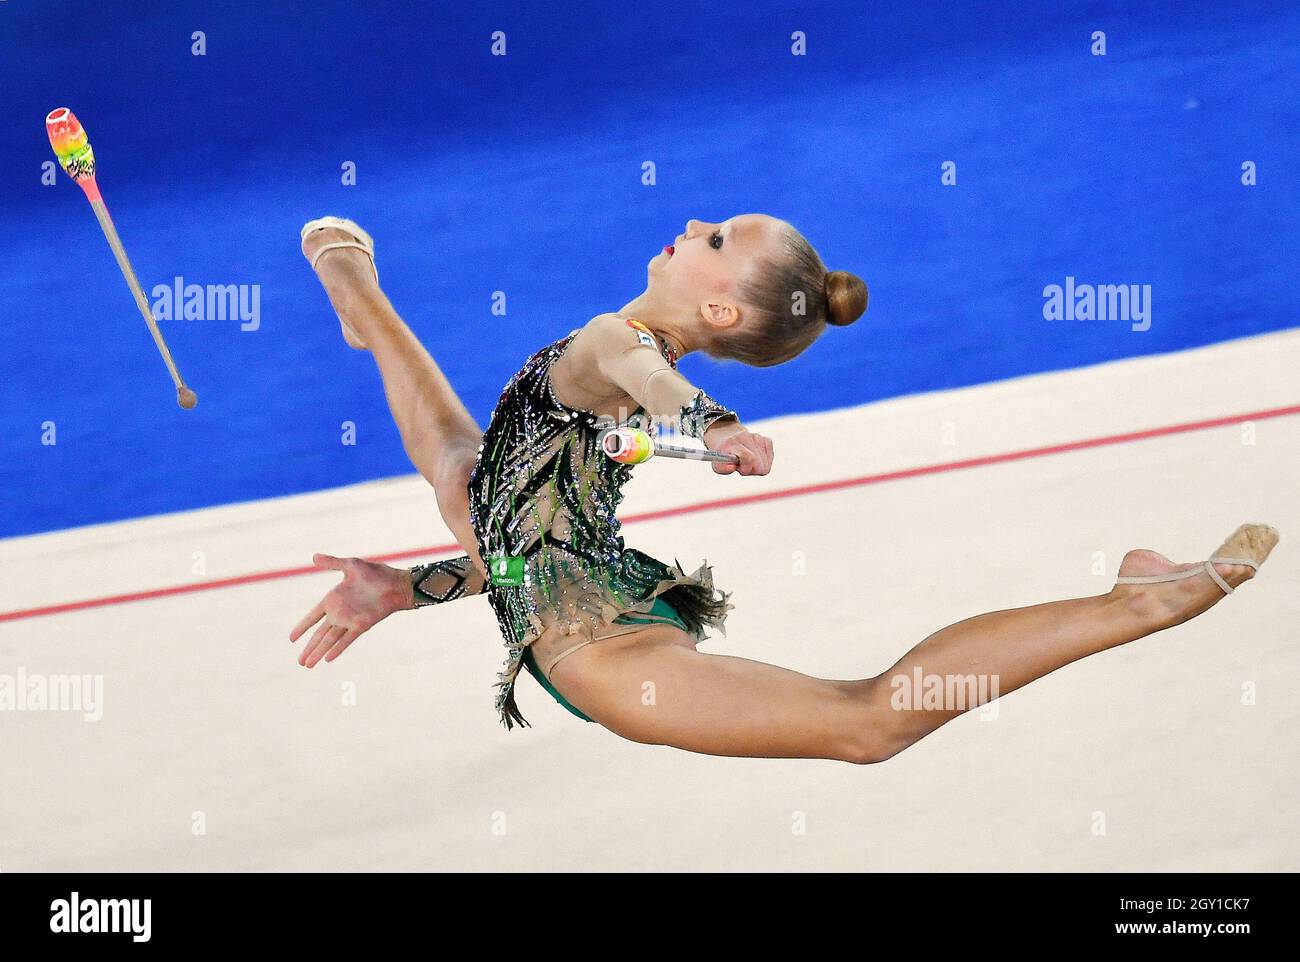 Russia, Moscow, 04.10.2021, The 8th Olimpico Rhythmic Gymnastics Tournament for the prizes of Olympic champion Yulia Barsukova at the Irina Viner-Usmanova Gymnastics Palace. Russian gymnast Arina Yankovskaya performing in the individual club routine at international competitions. 04.10.2021 Russia, Moscow  Credit: Kommersant Photo/Ivan Vodop'janov/Sipa USA Stock Photo